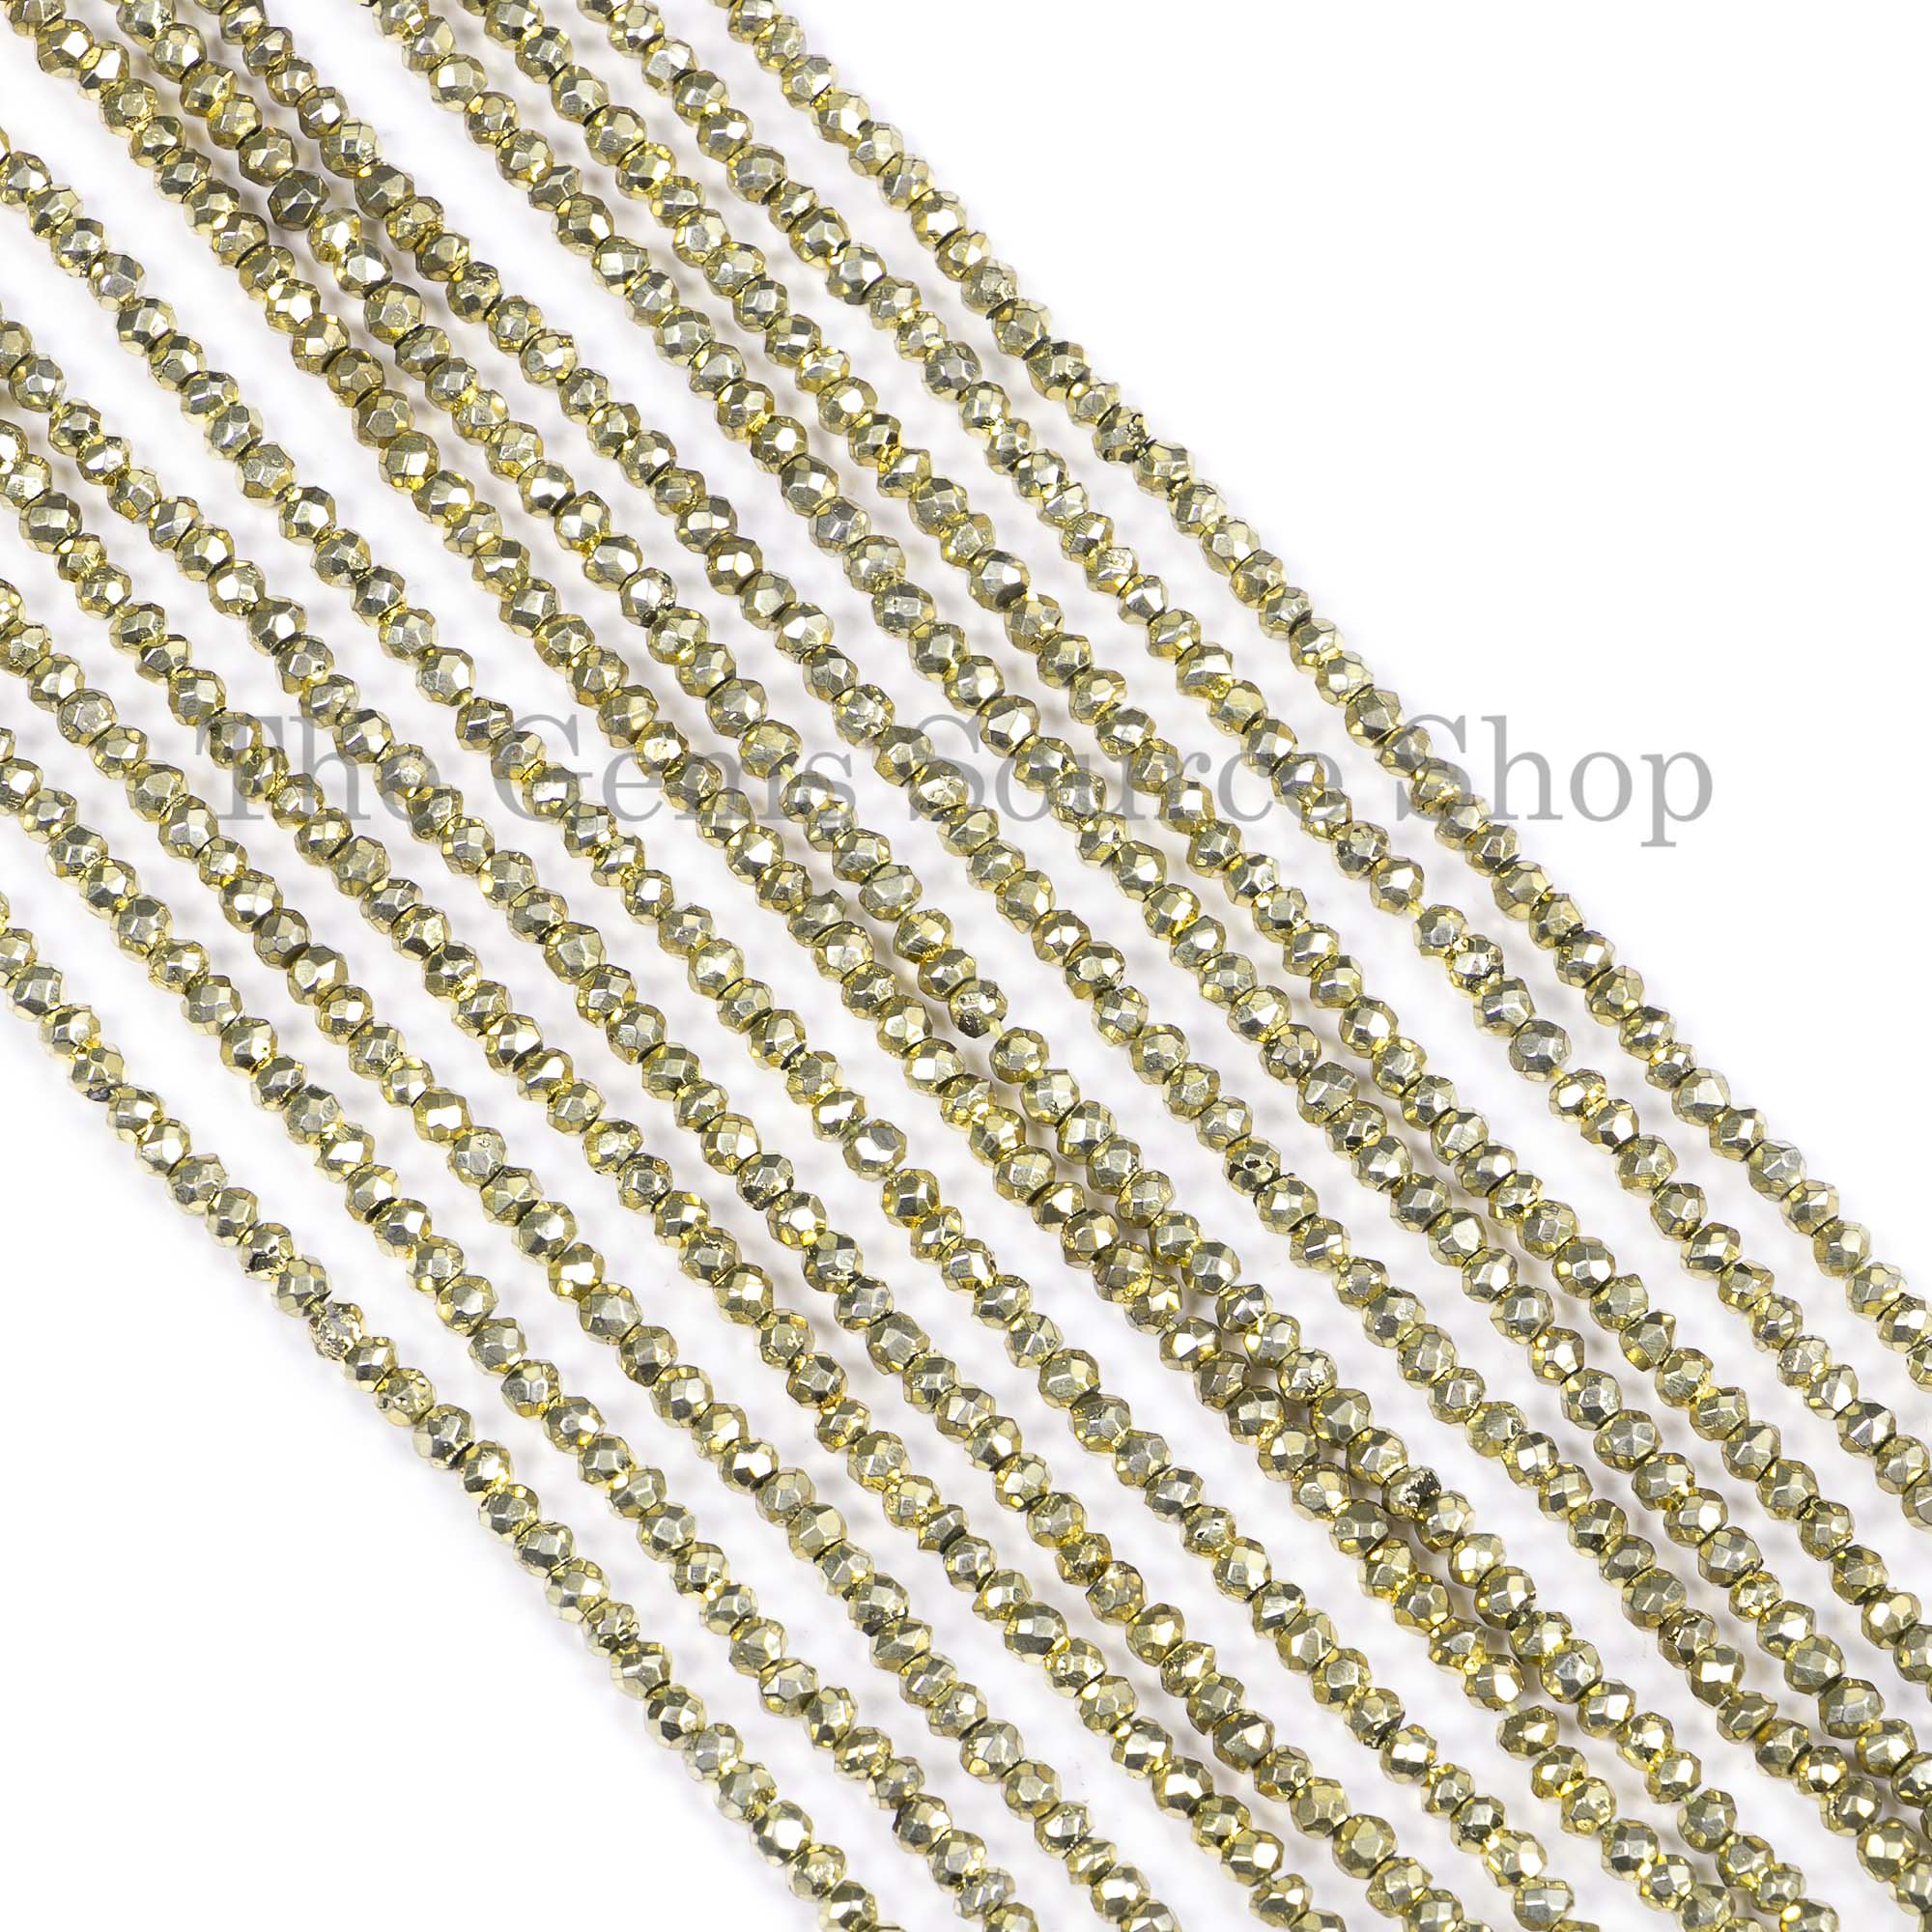 Natural Pyrite Faceted Rondelle Beads, Pyrite Coated Faceted Beads, Natural Pyrite Rondelle Beads